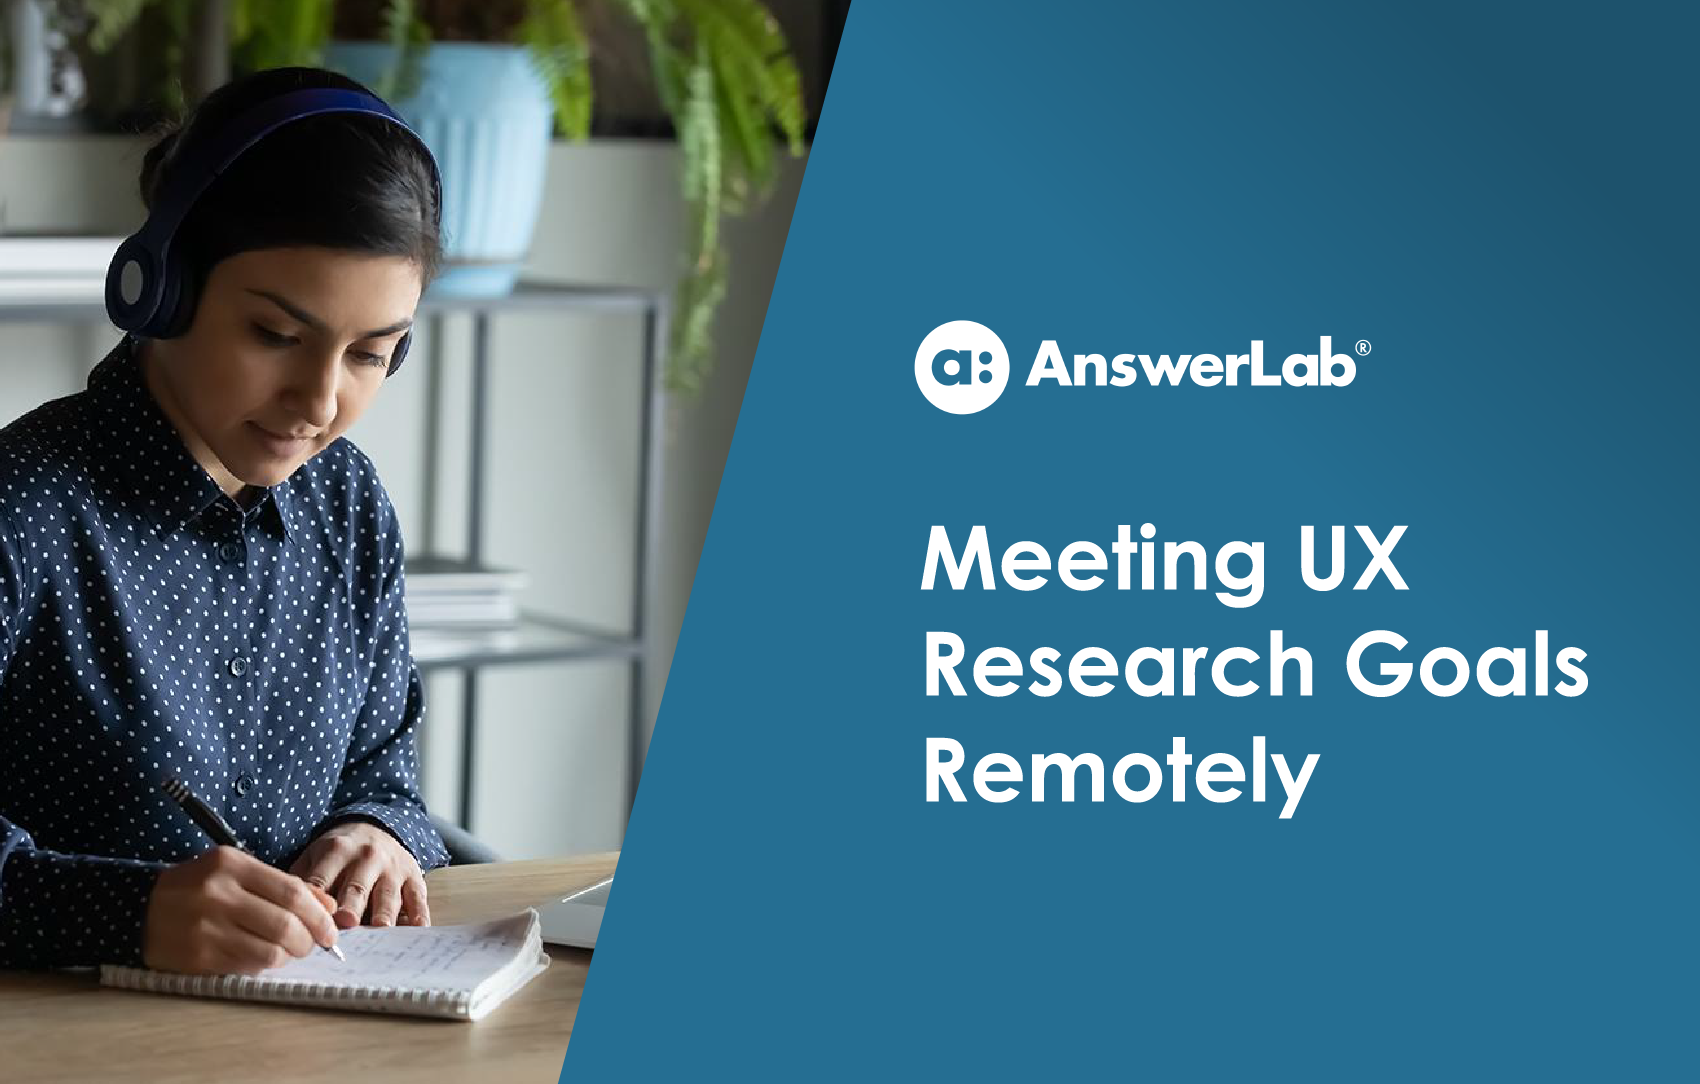 Meeting UX Research Goals Remotely